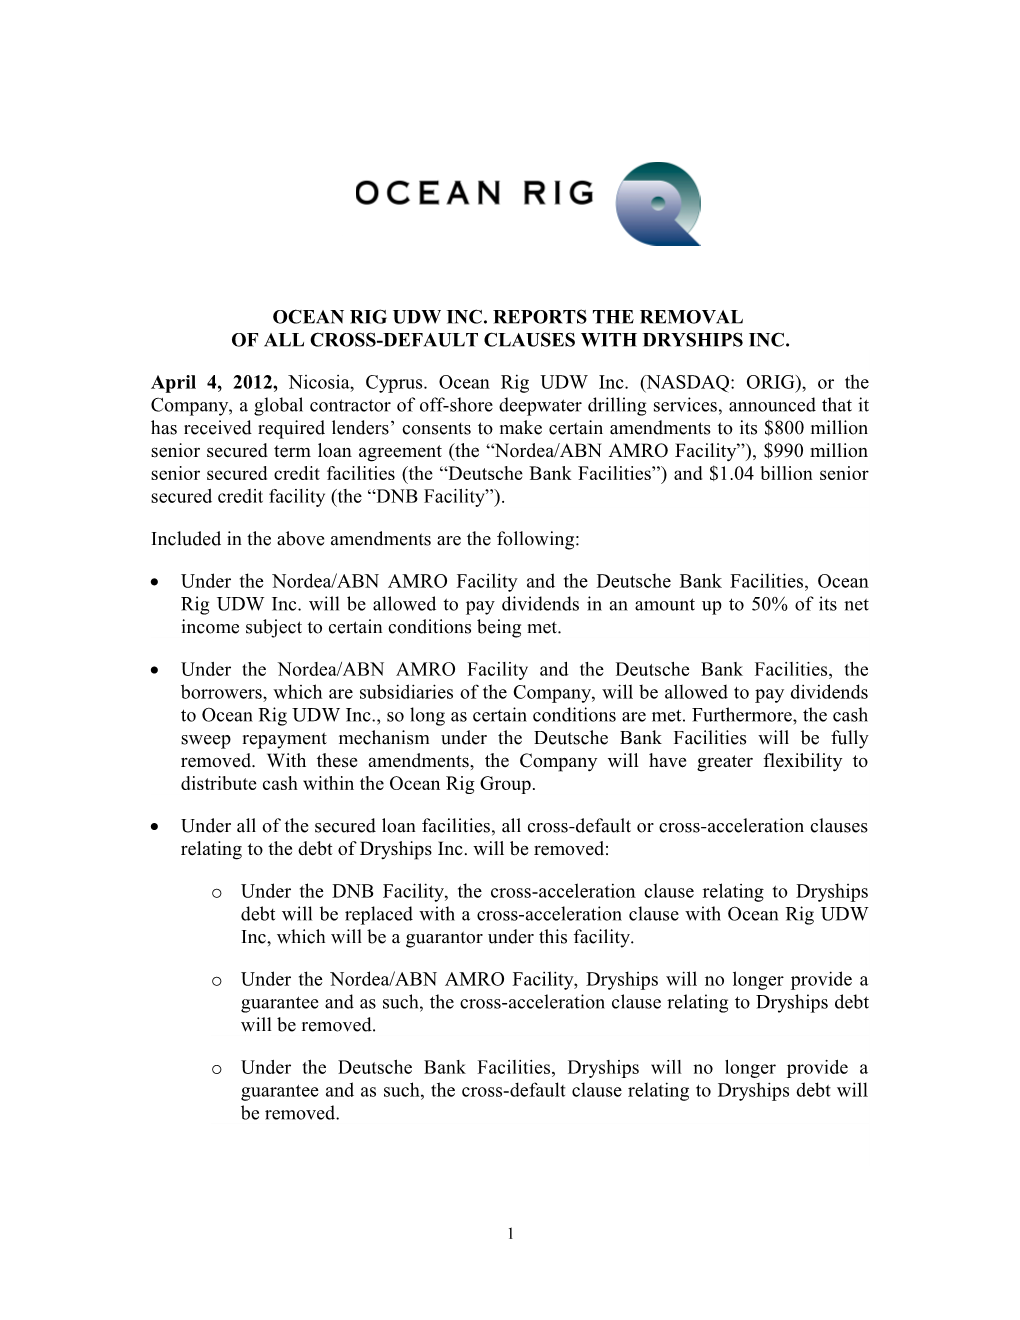 Ocean Rig Udw Inc. Reports the Removal